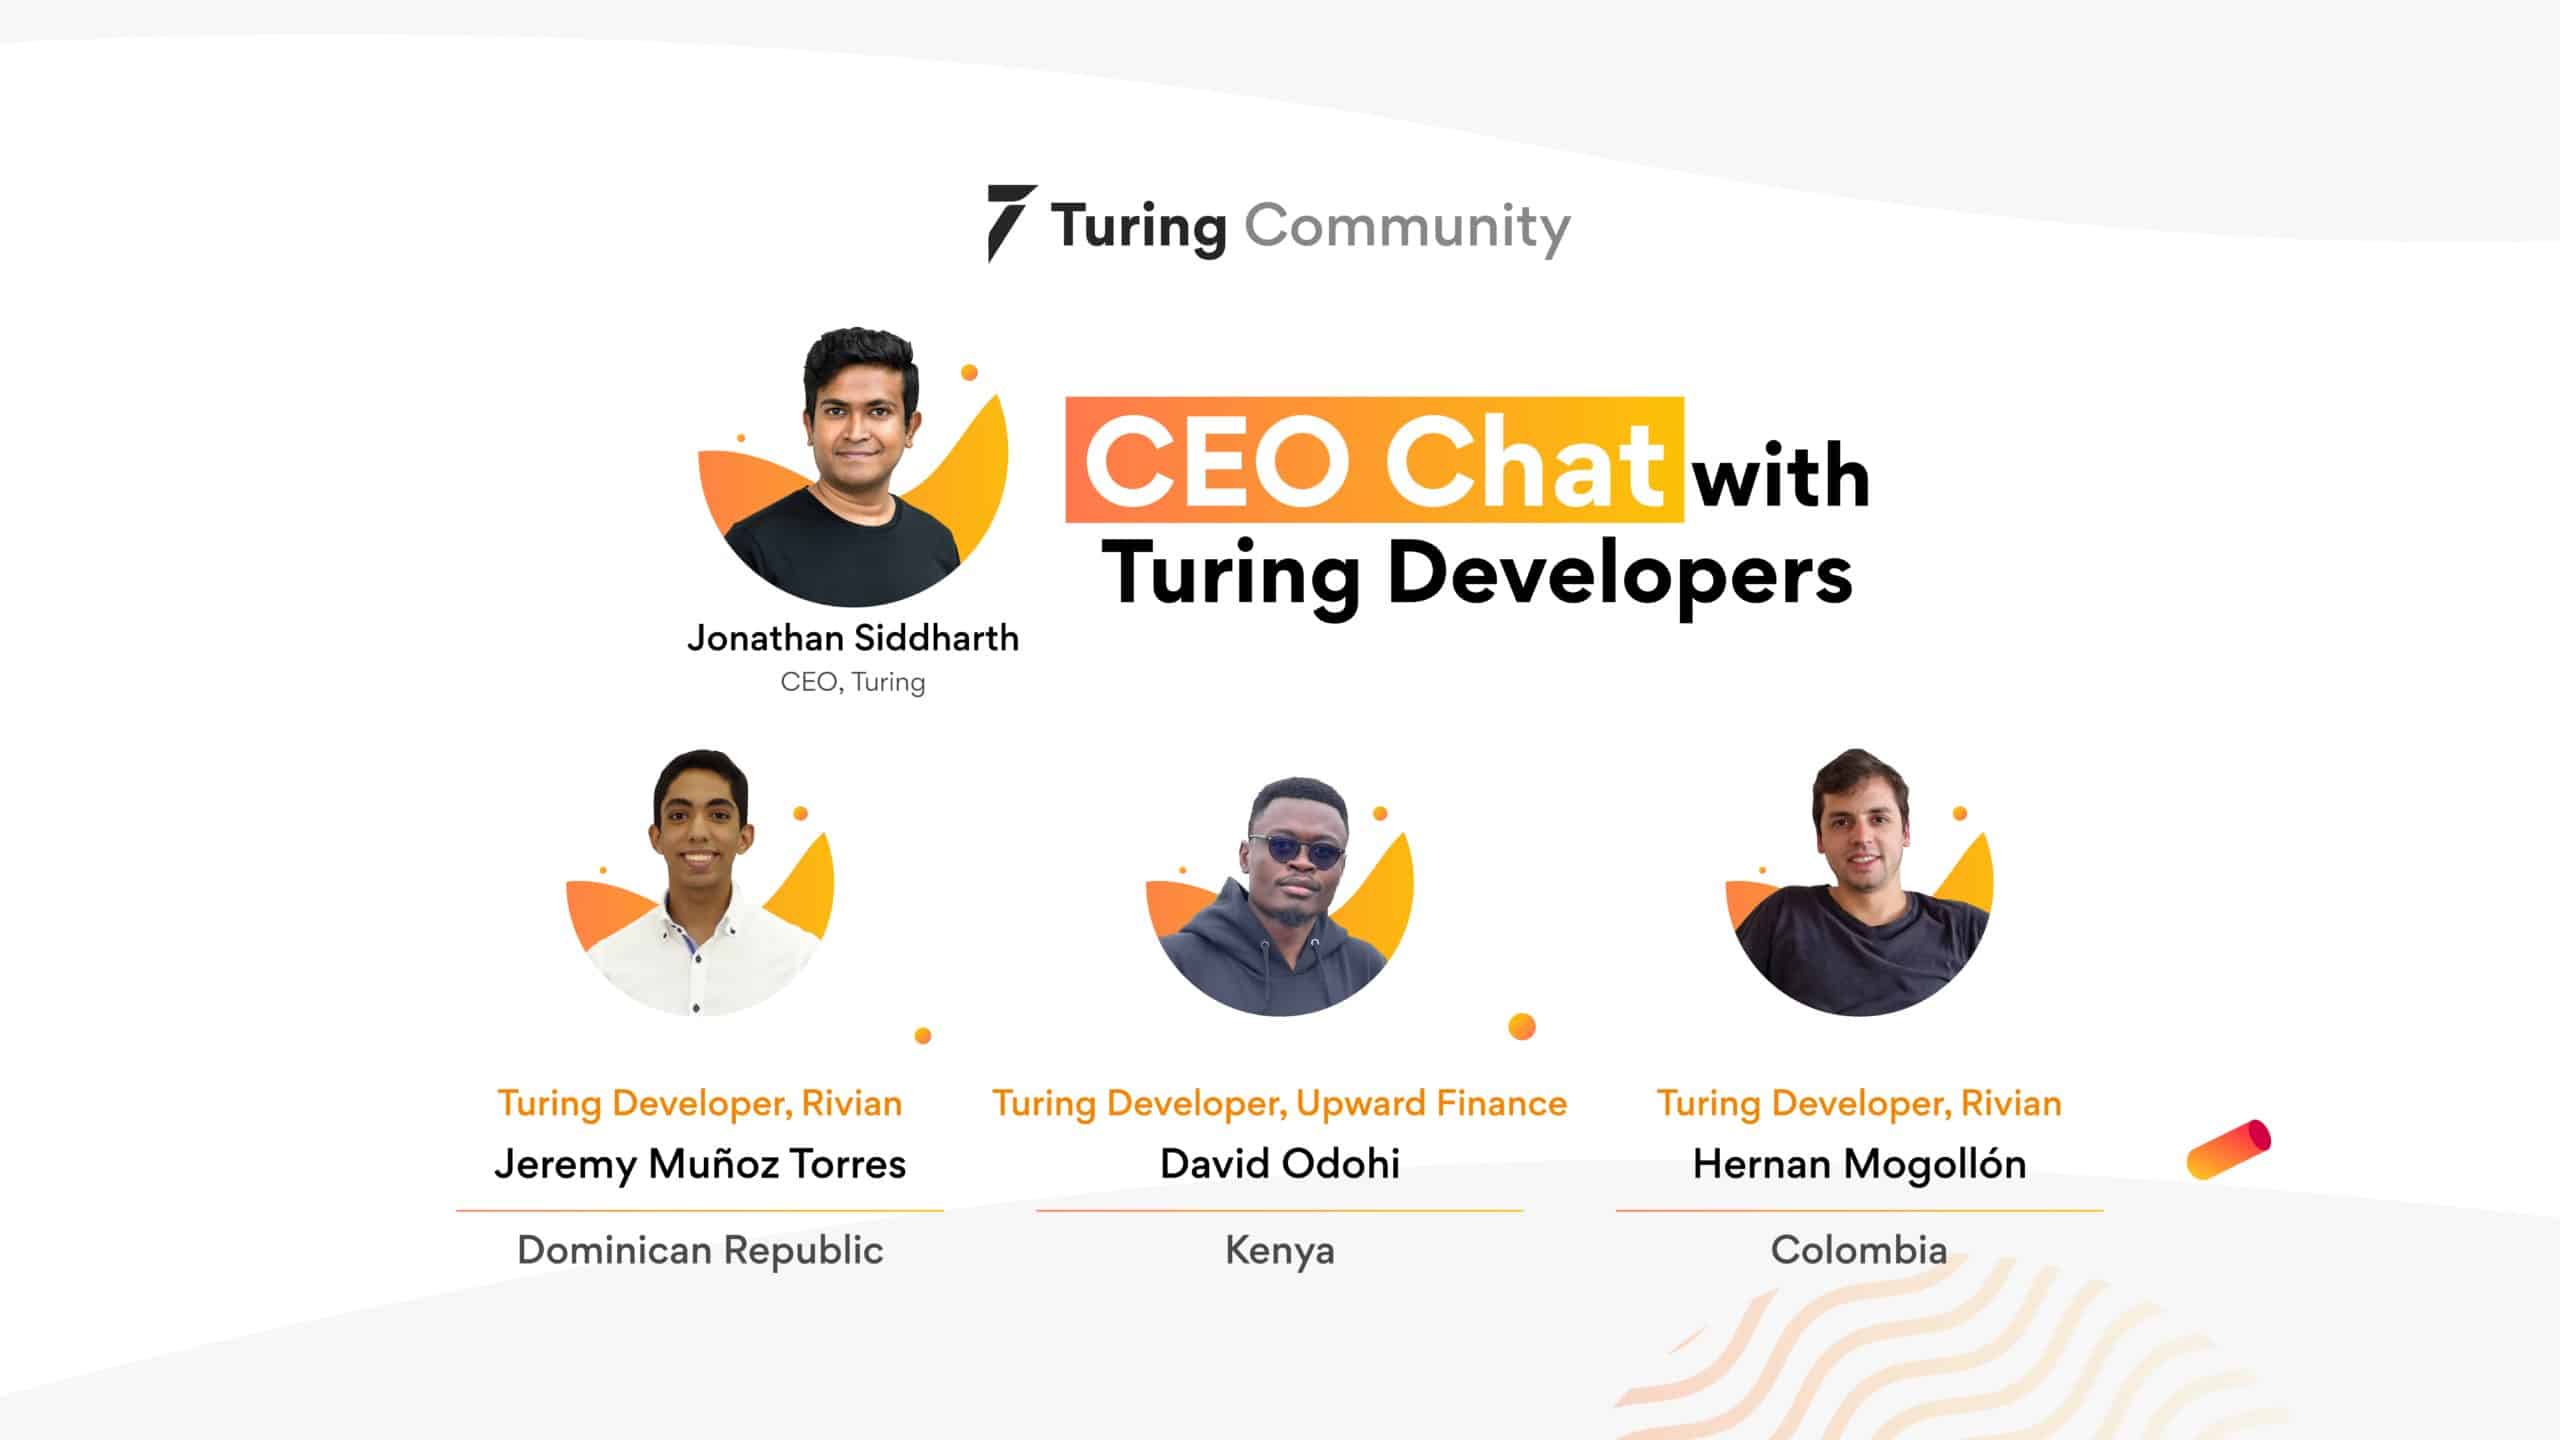 CEO Chat with Turing Developers